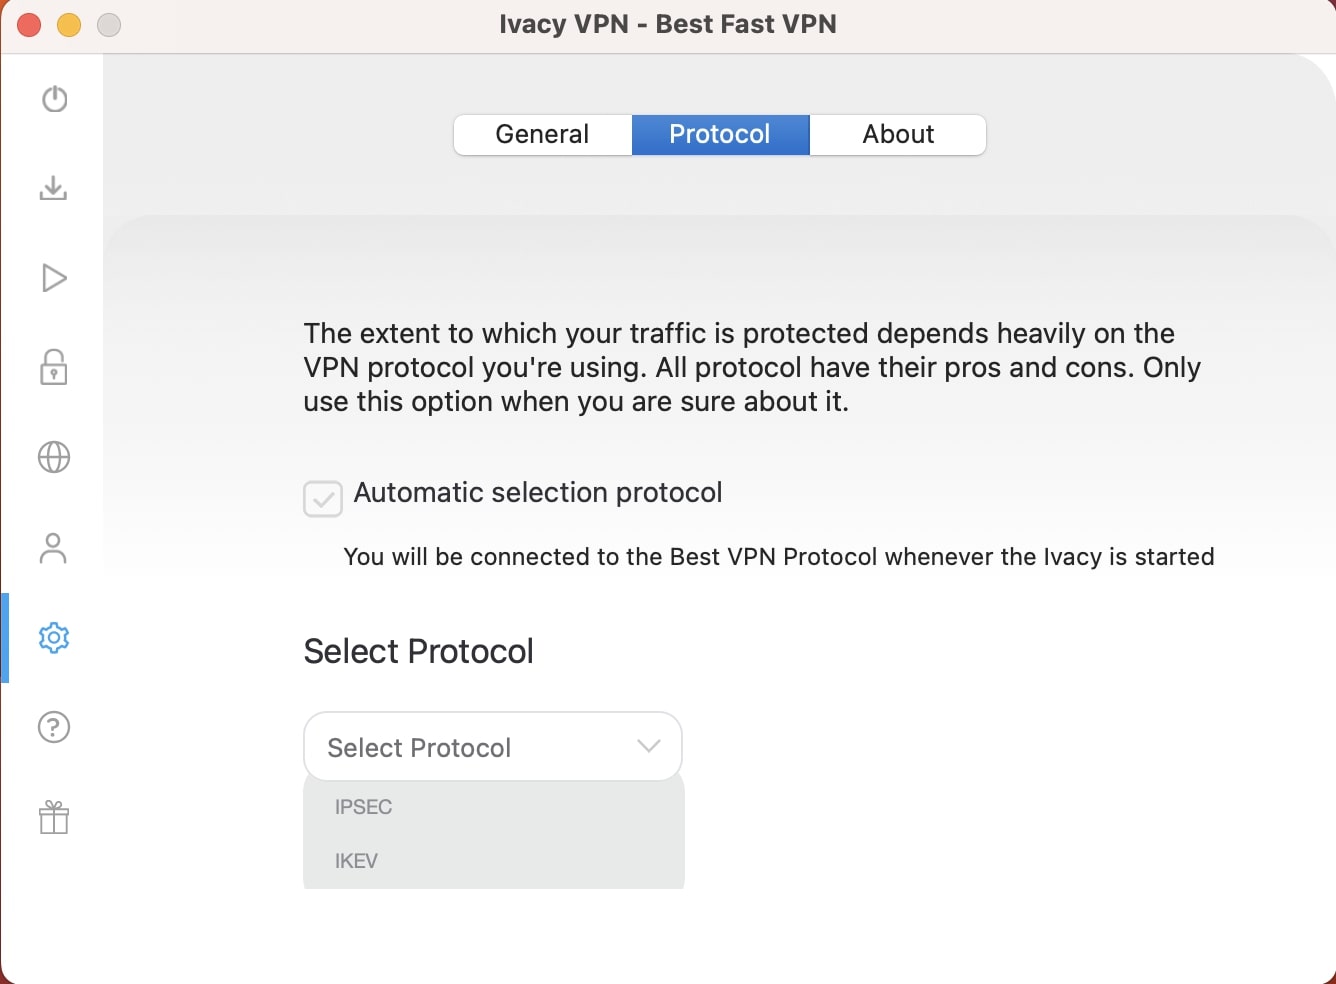 Protocol selection screen for Ivacy VPN